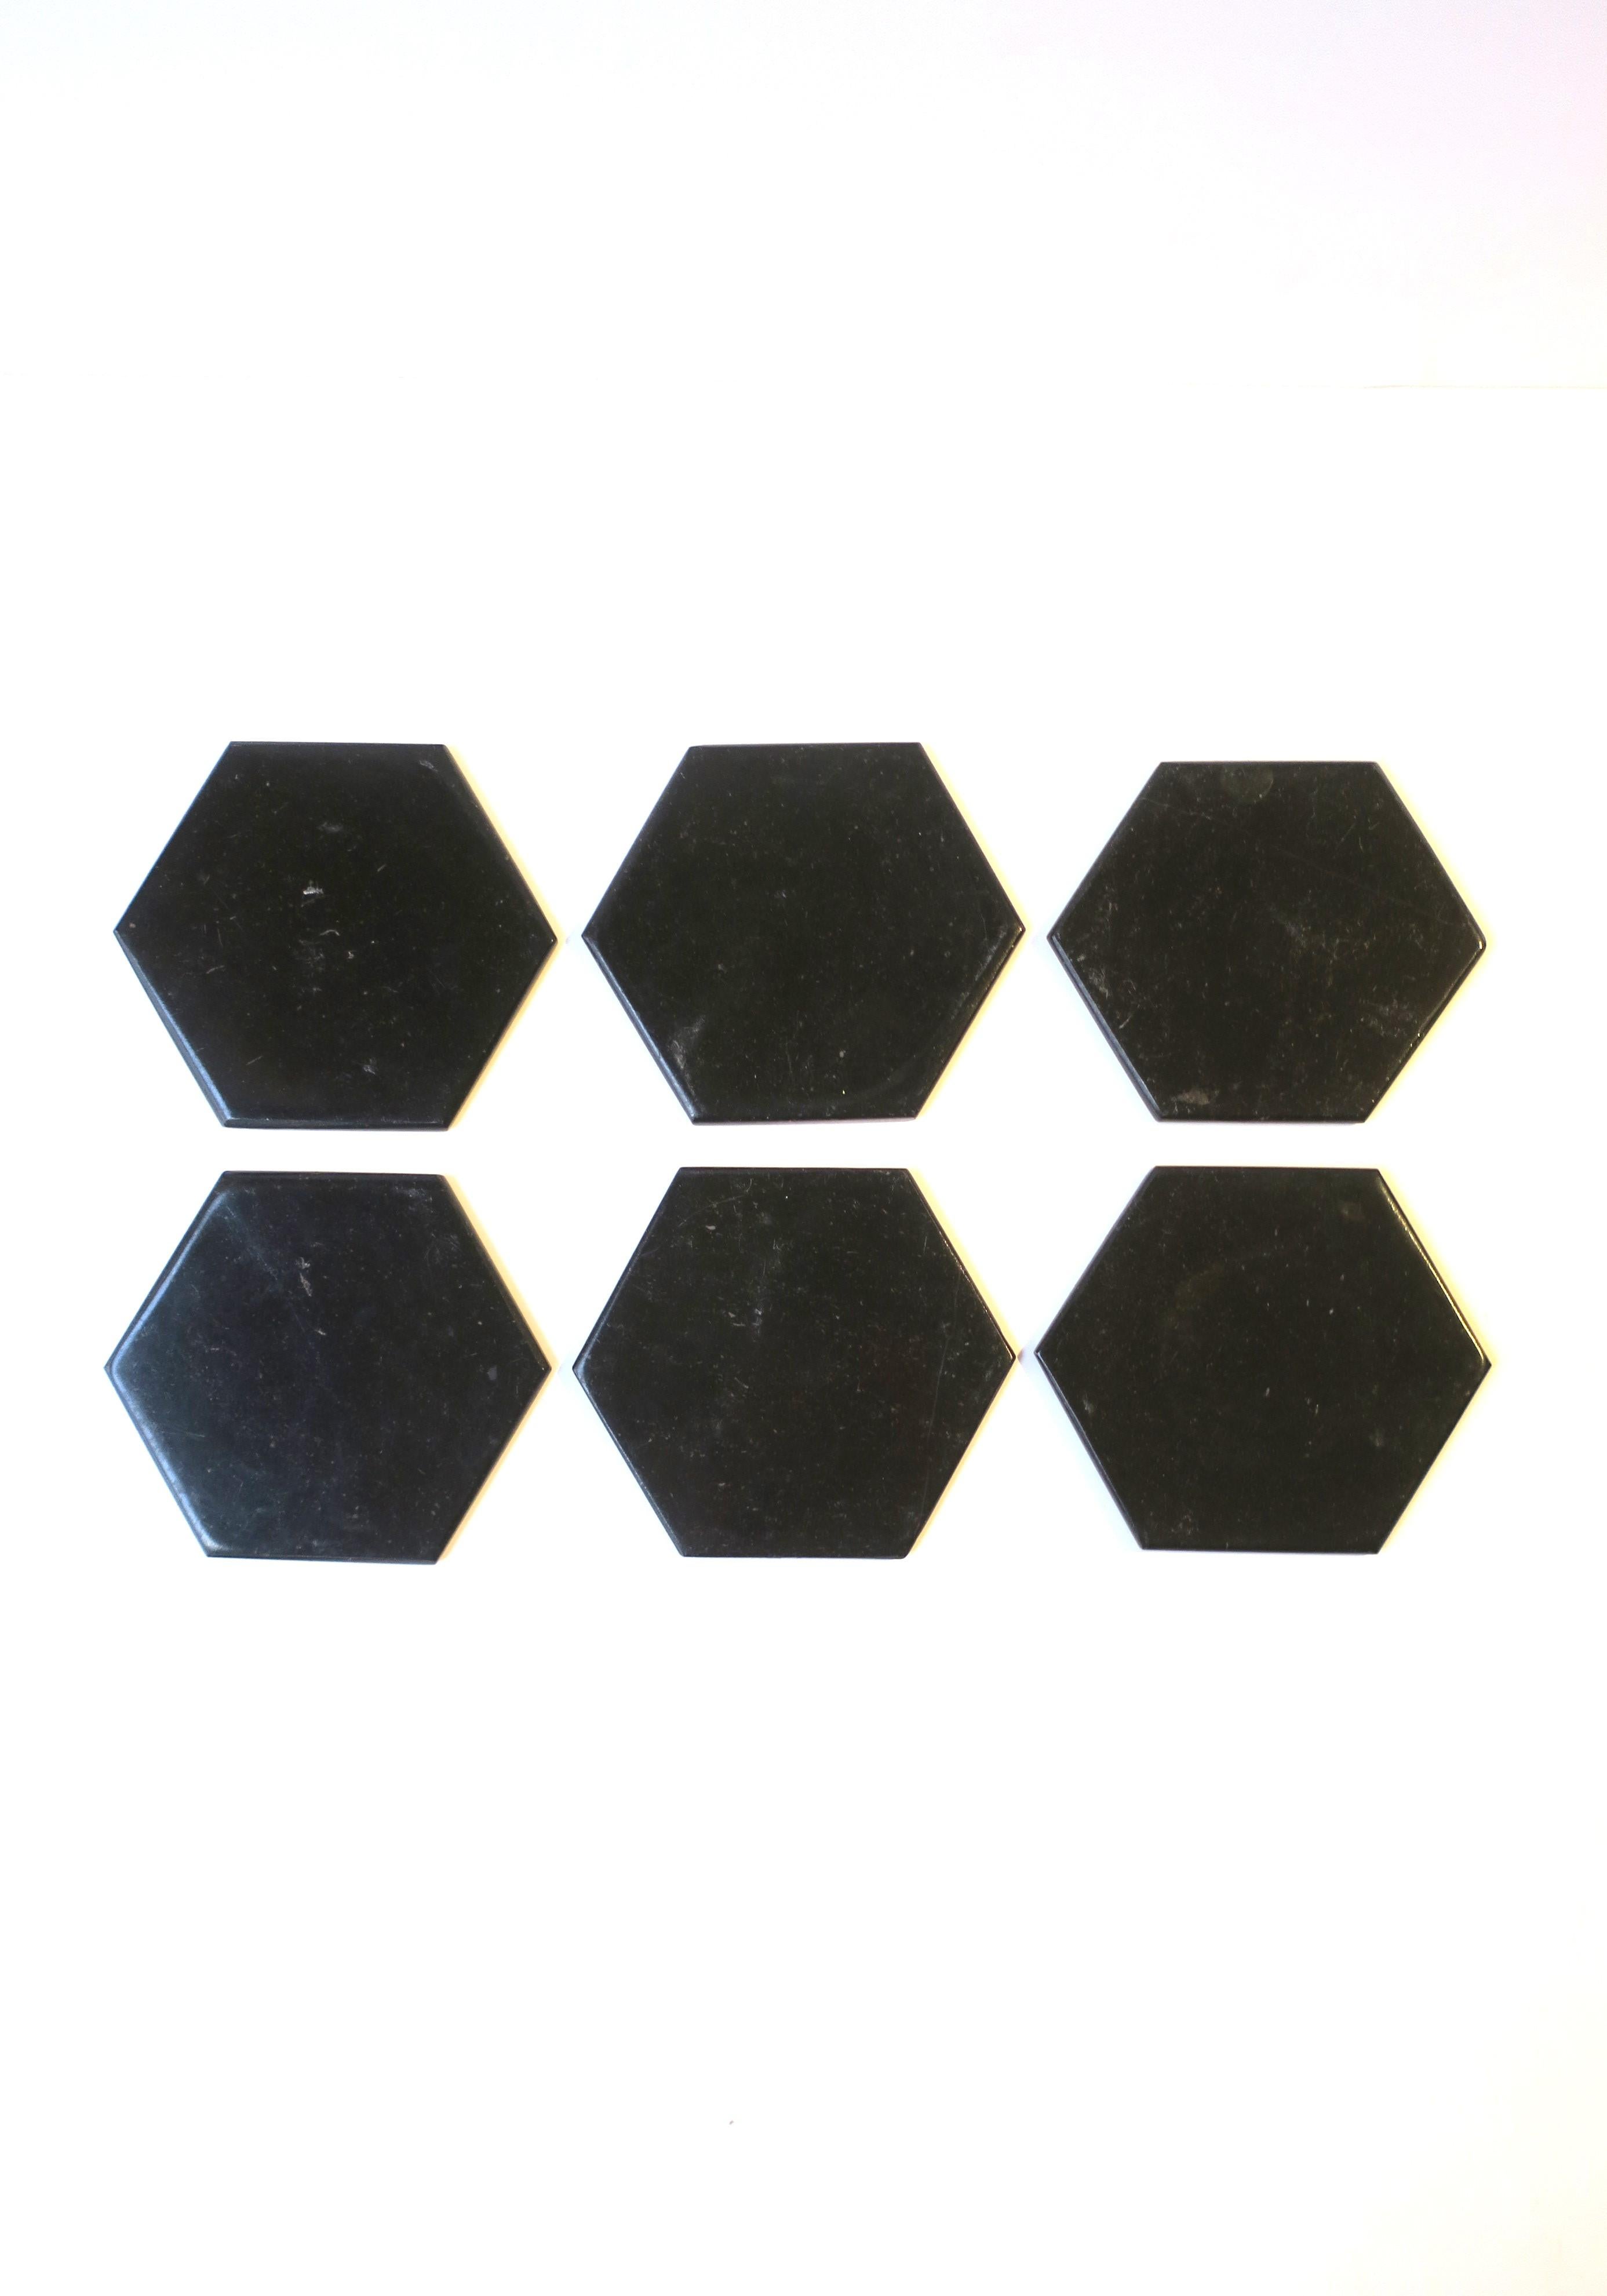 A great set of six (6) Italian jet black marble stone hexagon cocktail or drinks coasters, with holder, in the Modern style or Postmodern period, circa 1970s, Italy. The hexagon shape is a great alternative to round. Set includes 6 marble coasters